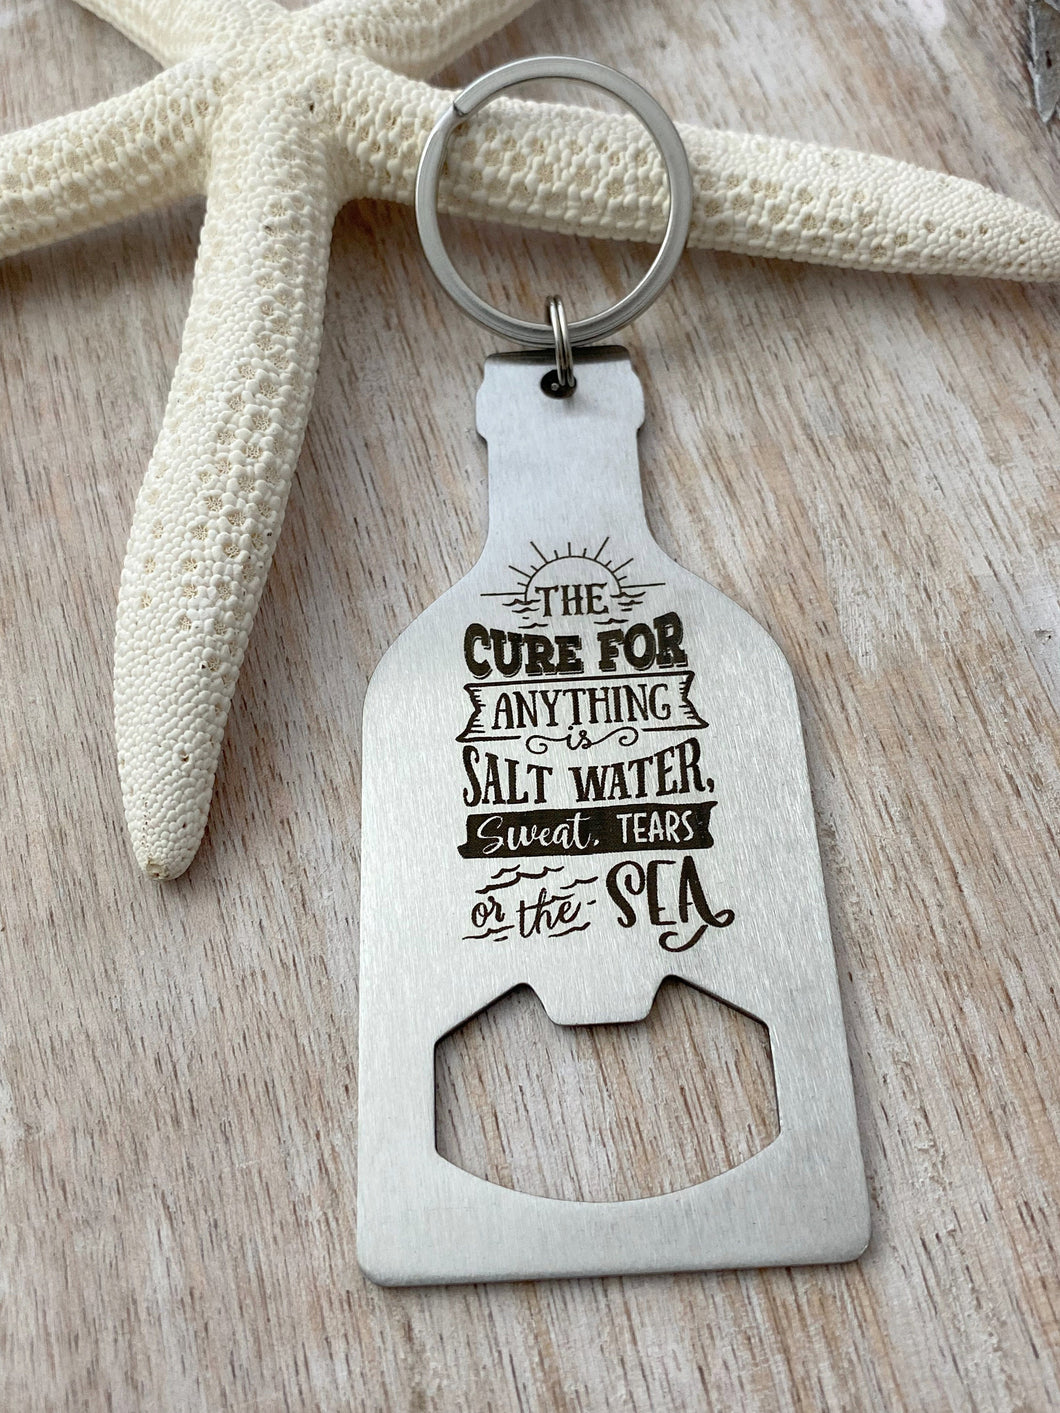 the cure for anything is salt water sweat tears or the sea - stainless steel bottle opener keychain - beach gift for friend ocean theme